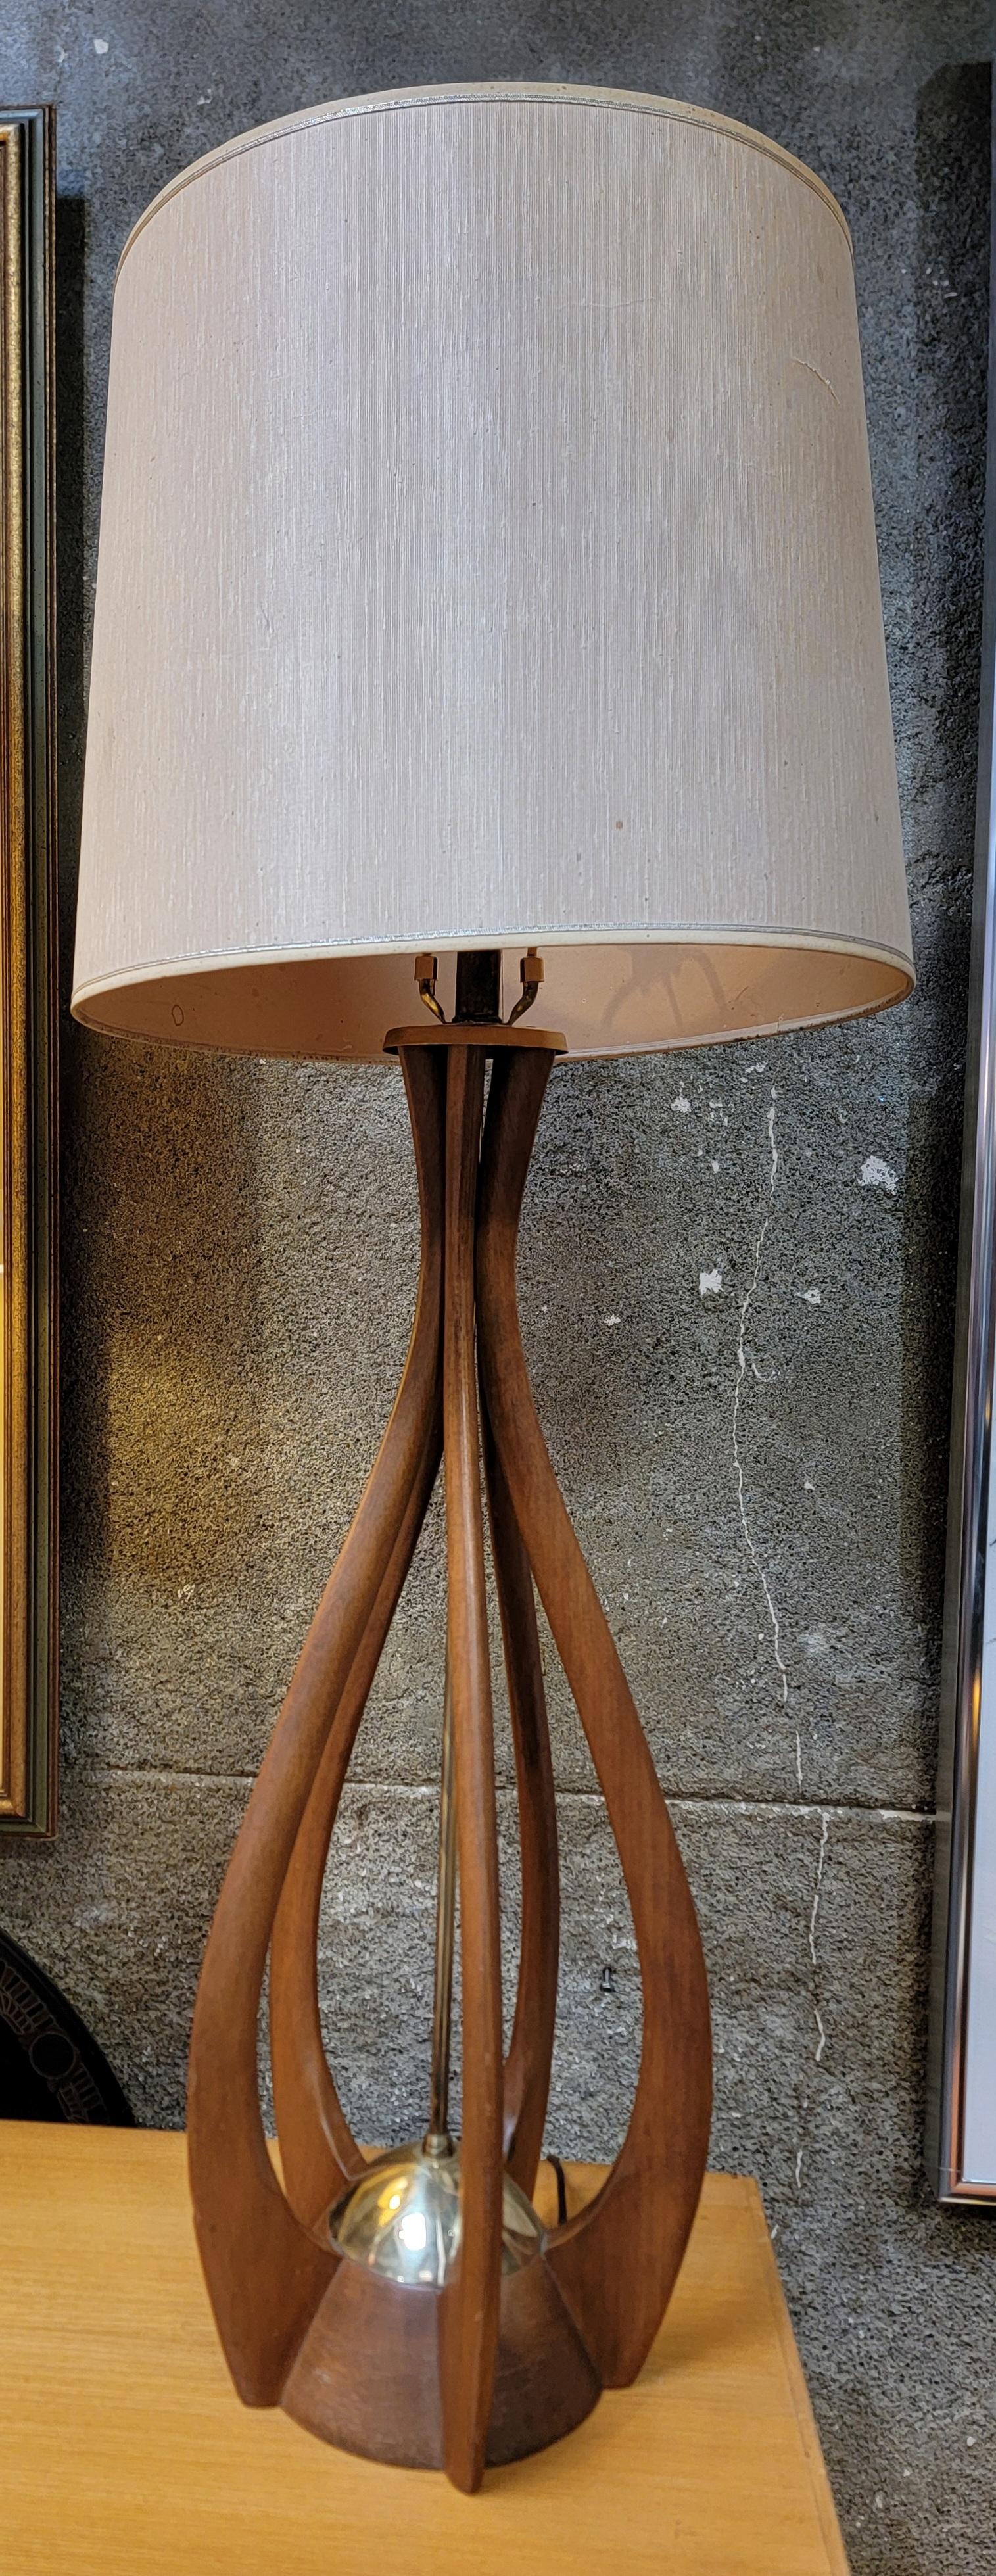 A sculptural walnut table lamp in the manner of Modeline, attributed to John Keal. 

Height to finial 40.75 in
Height to base of socket 26.5 in.

Shade is not included, worn and tattered.